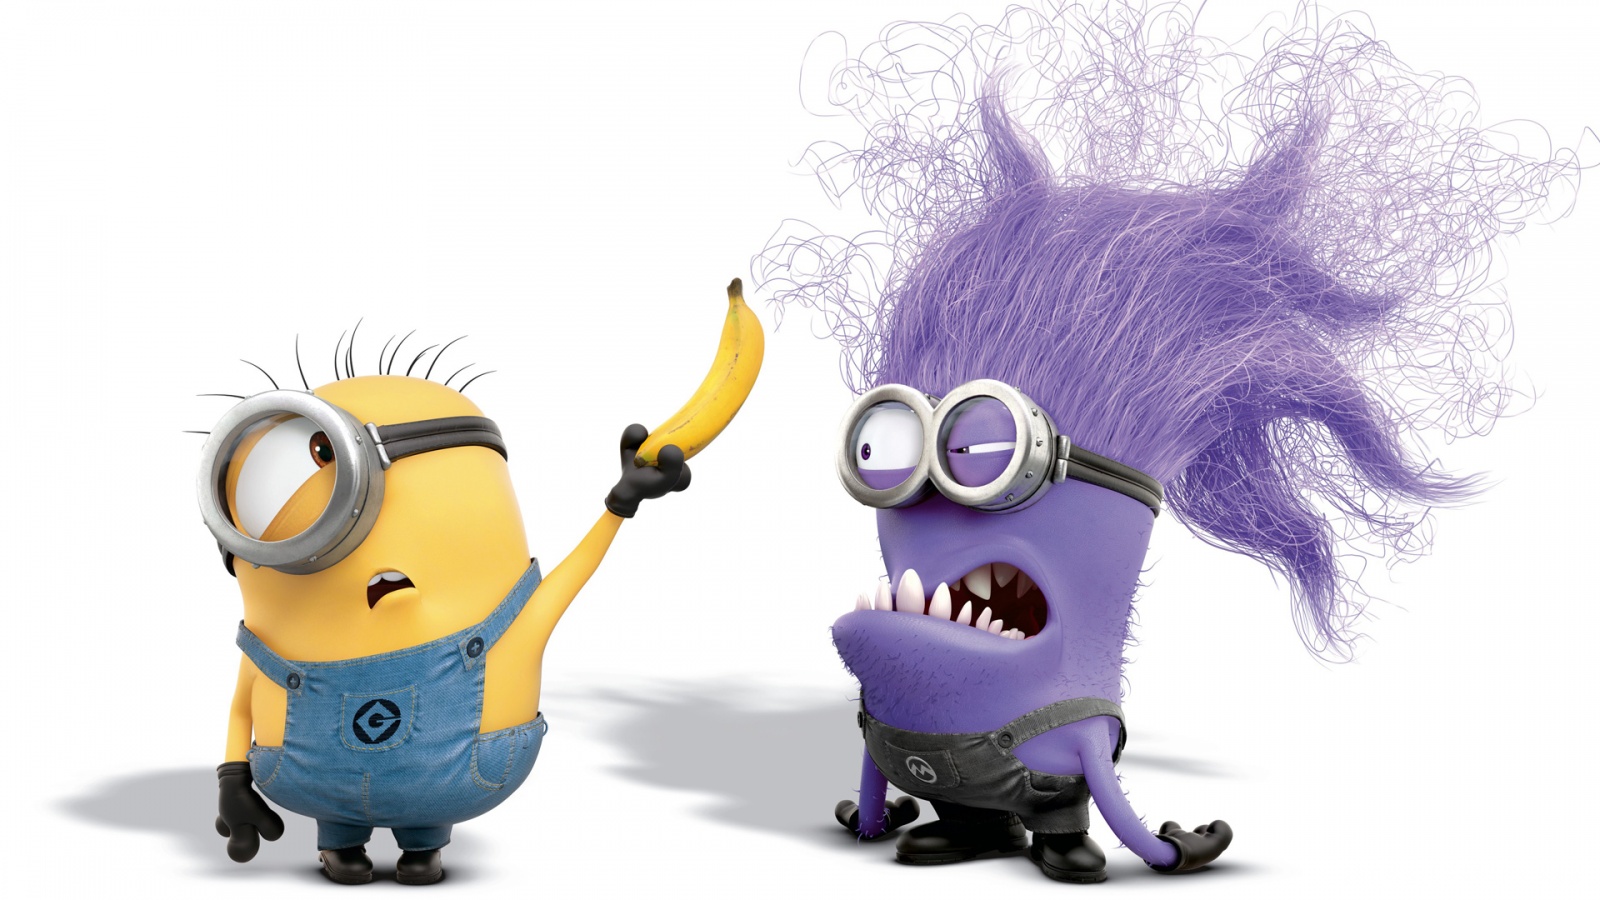 Funny Minions Wallpaper HD Wallpaper with 1600900 Resolution 1600x900